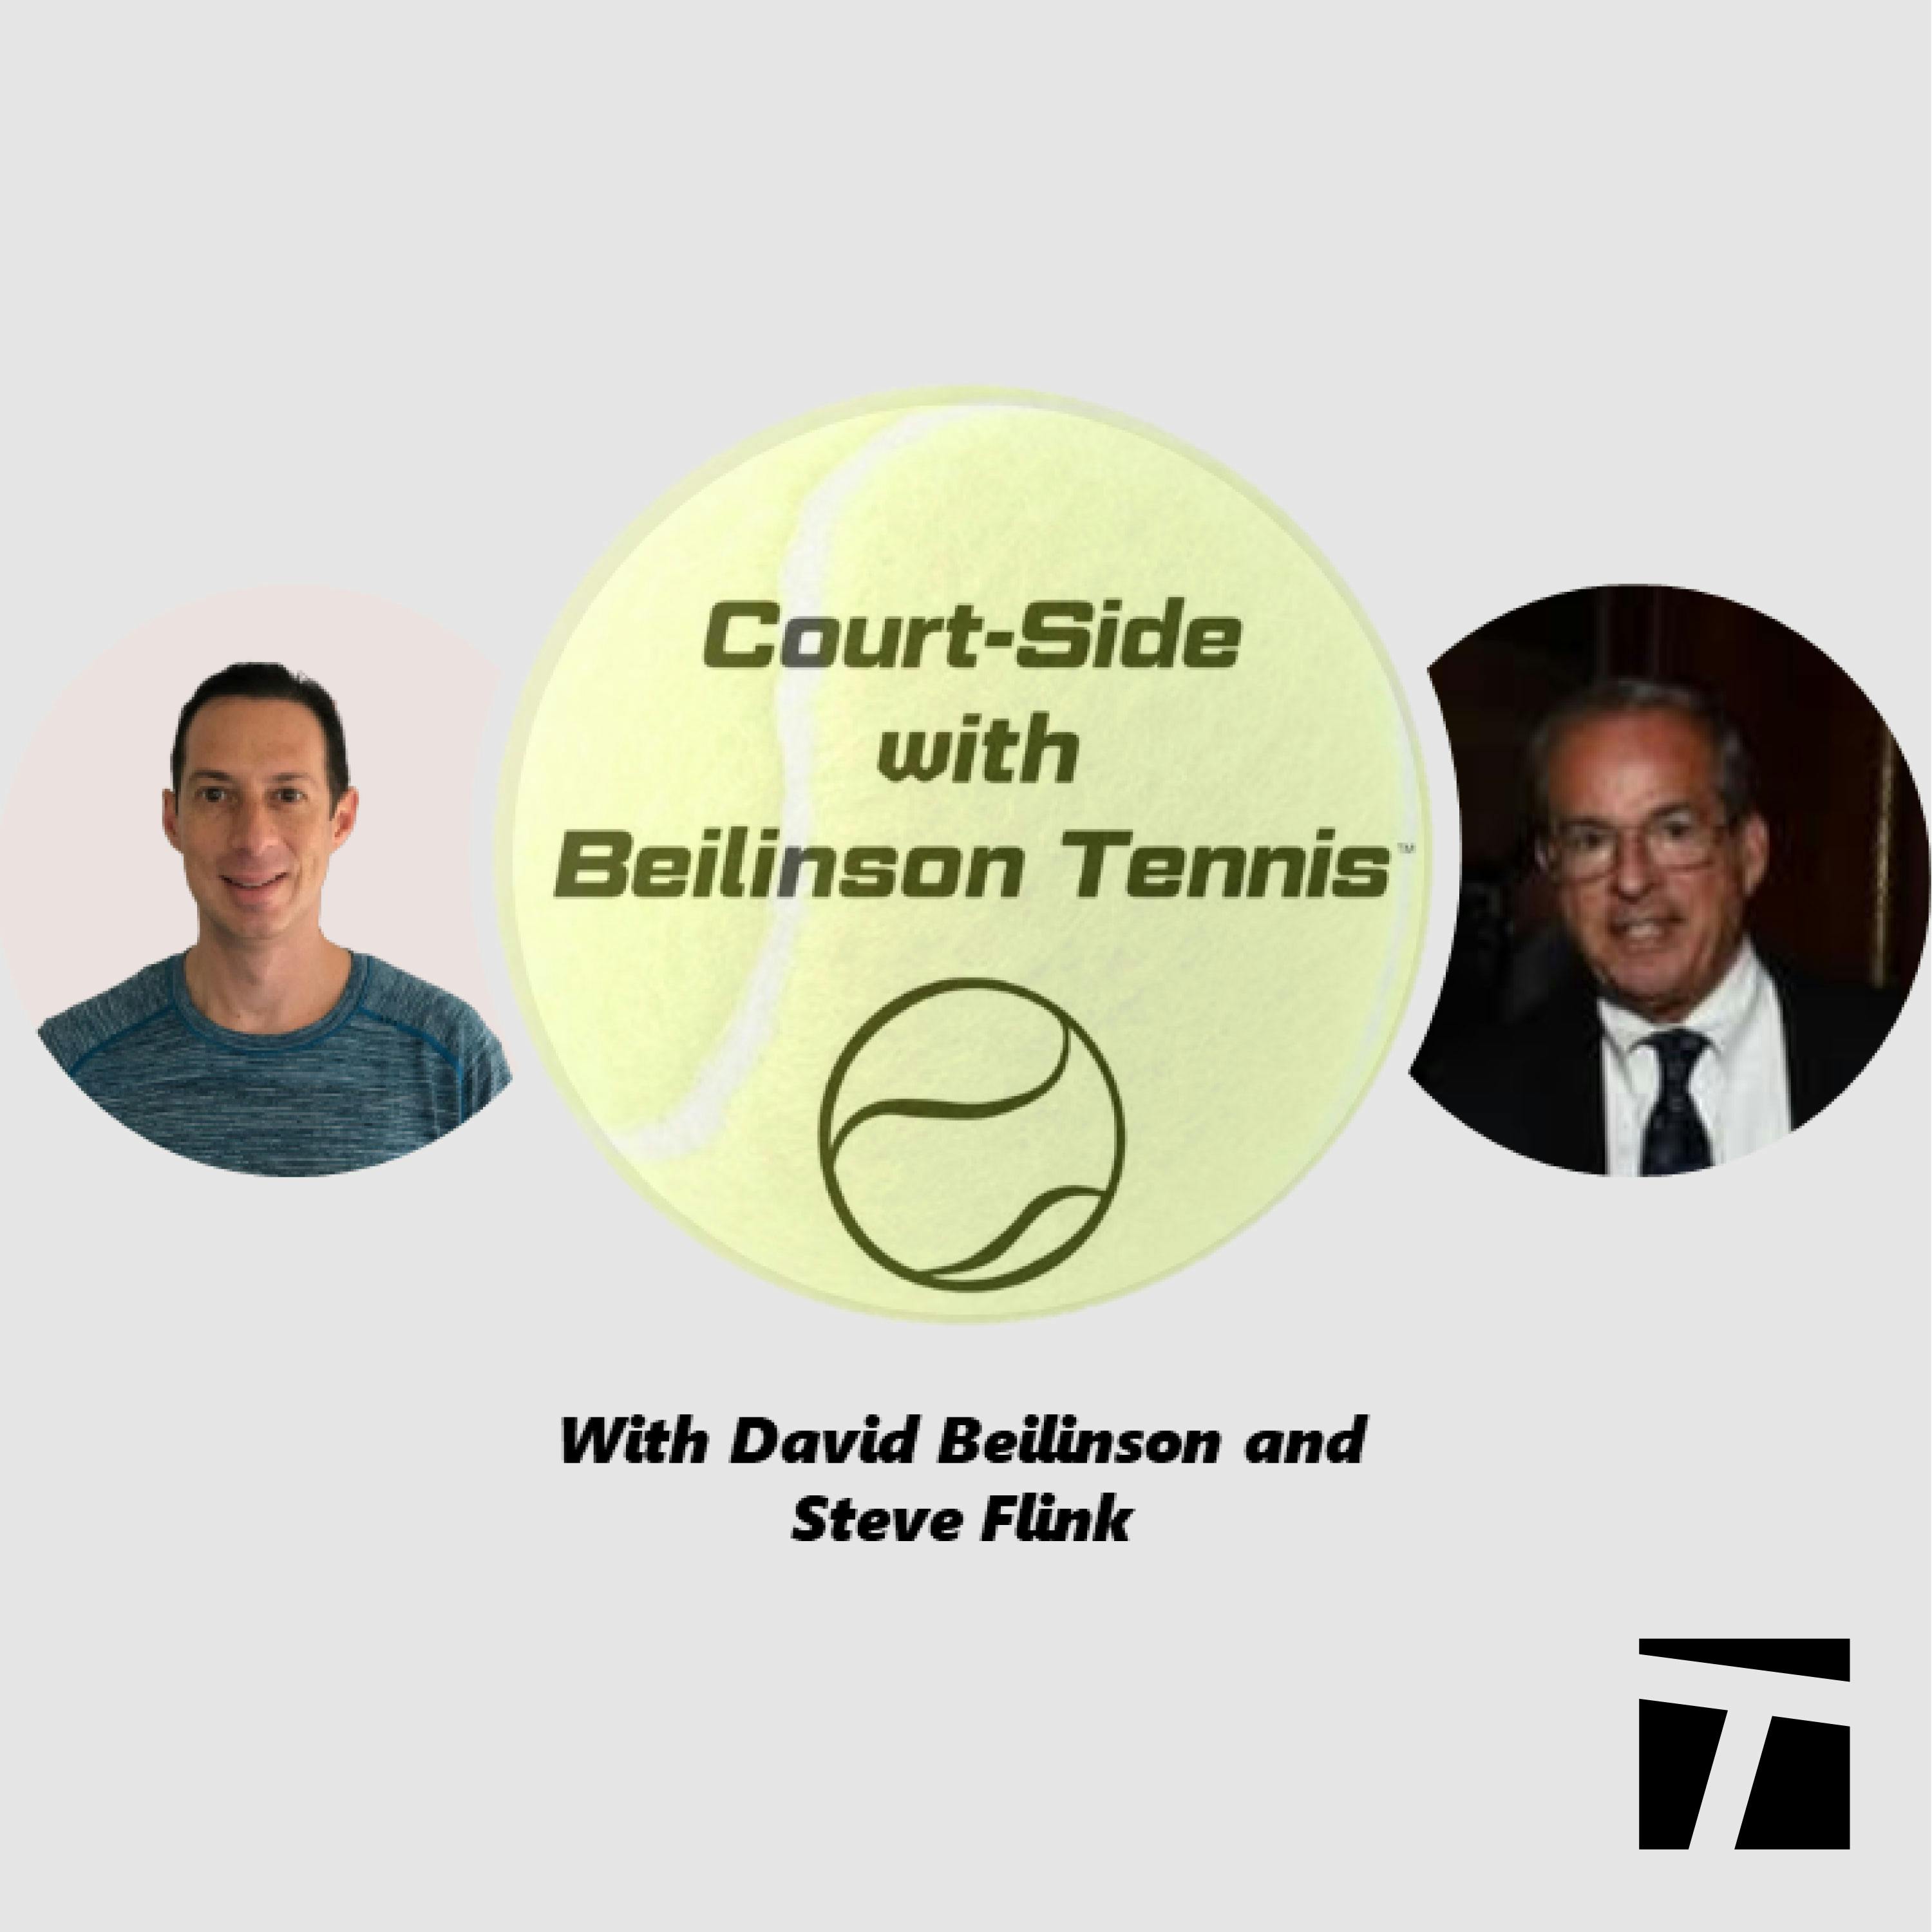 Court-Side with Beilinson Tennis